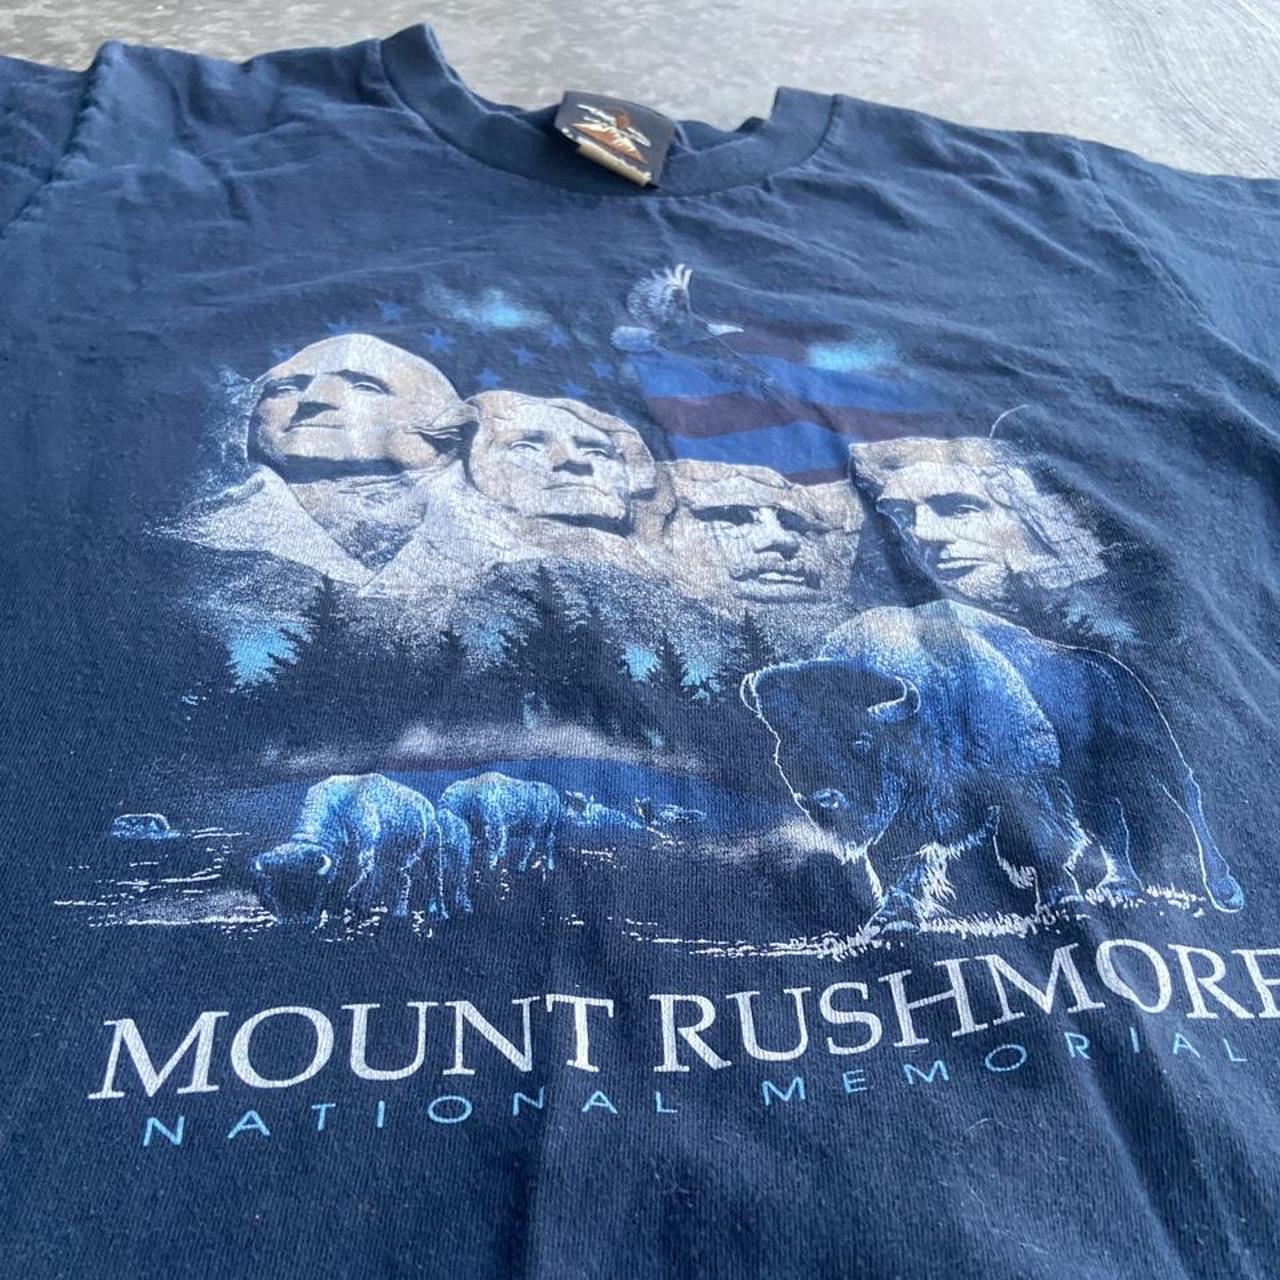 Product Image 3 - Praire Mountain-Mount Rushmore Tee
Excellent condition